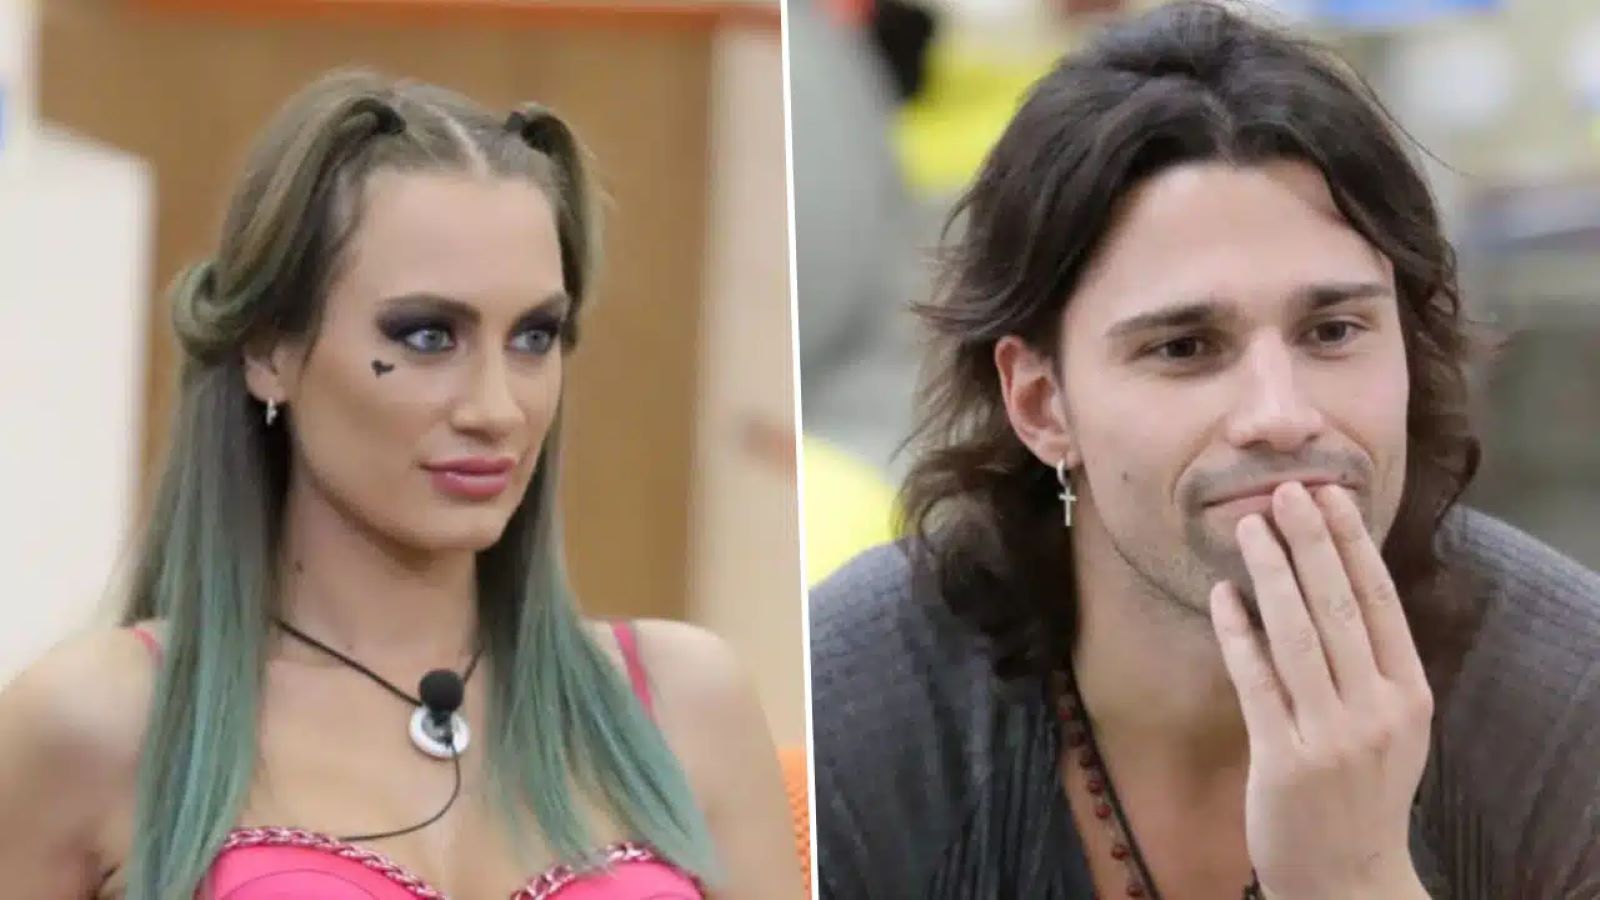 Big Brother Vip 7, Nikita Pelizon cries for Luca Onestini: "I don't want to lose him in my life"